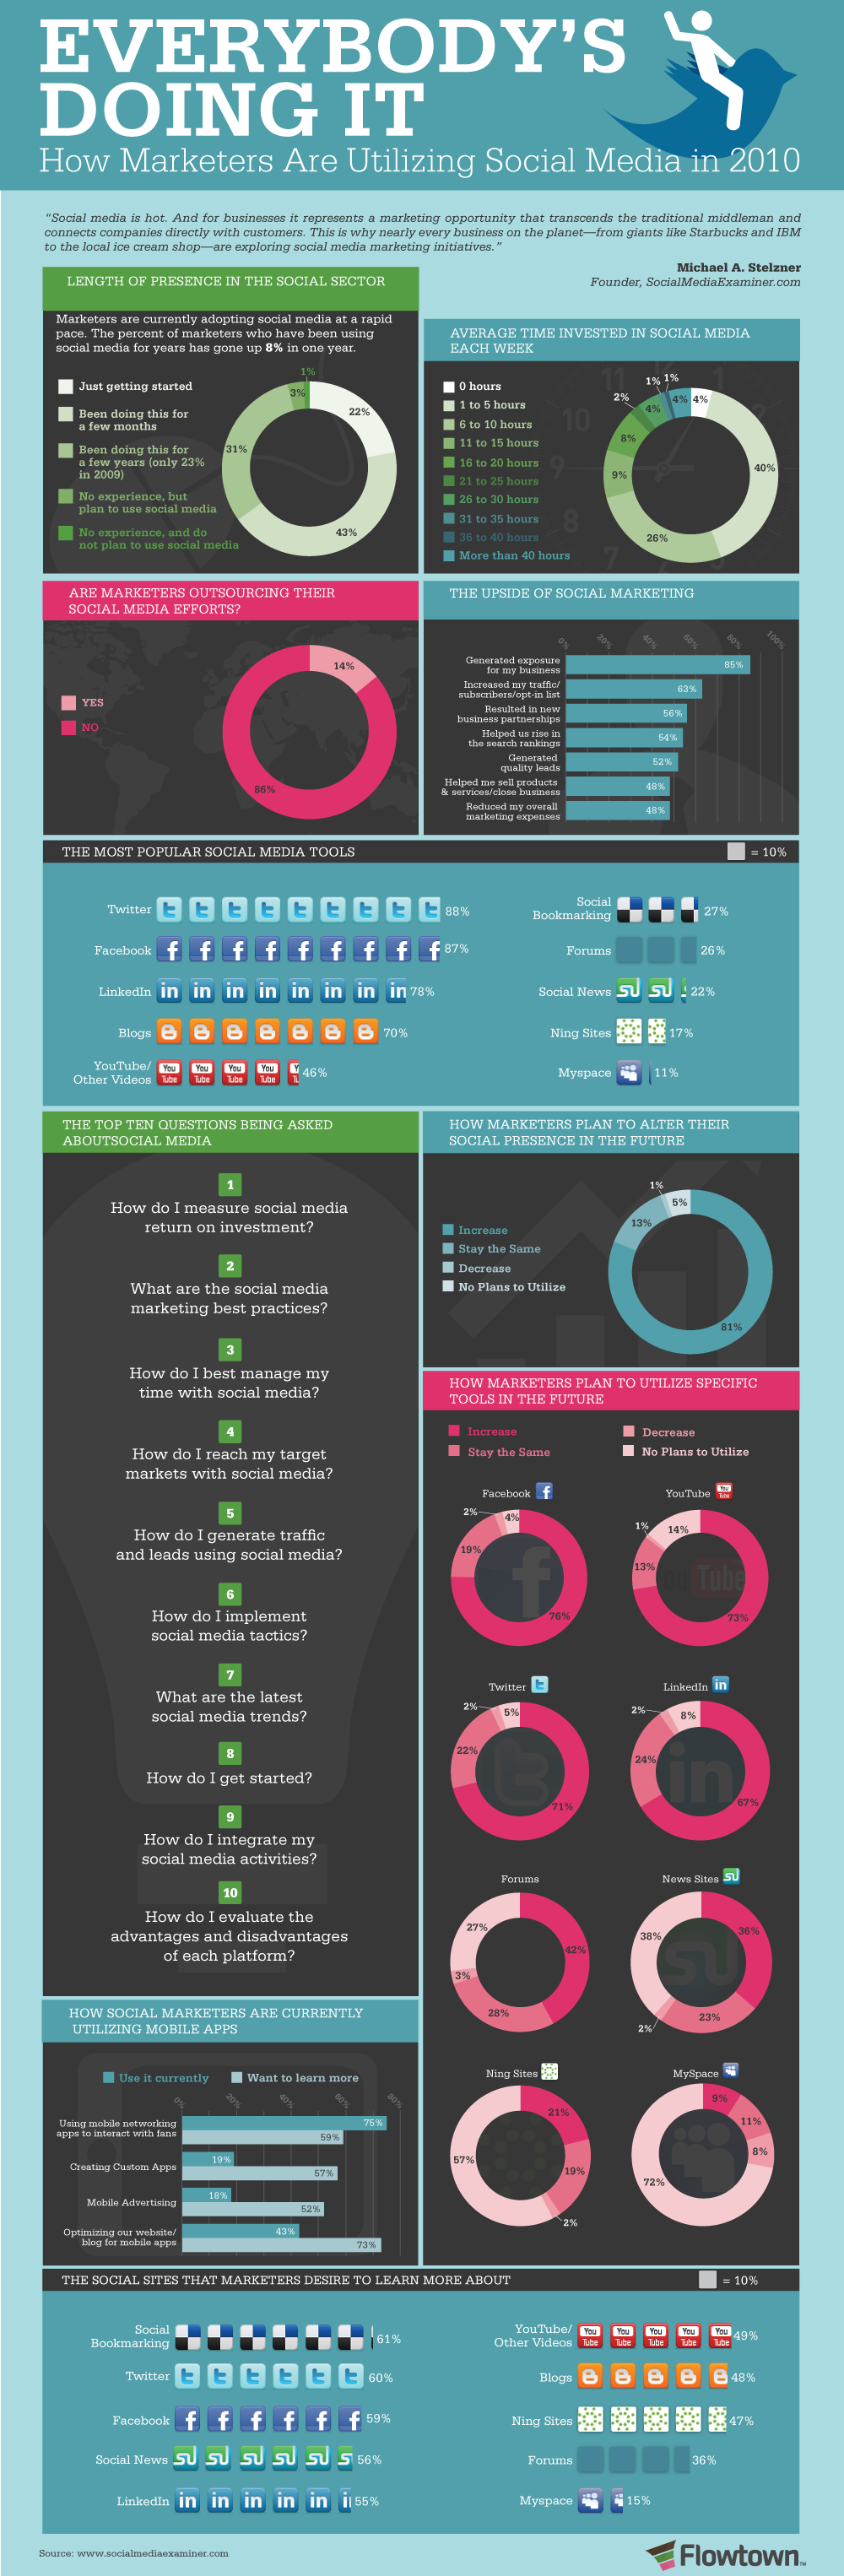 Everybodys doing it - How Social Media is being used for business - Grafik